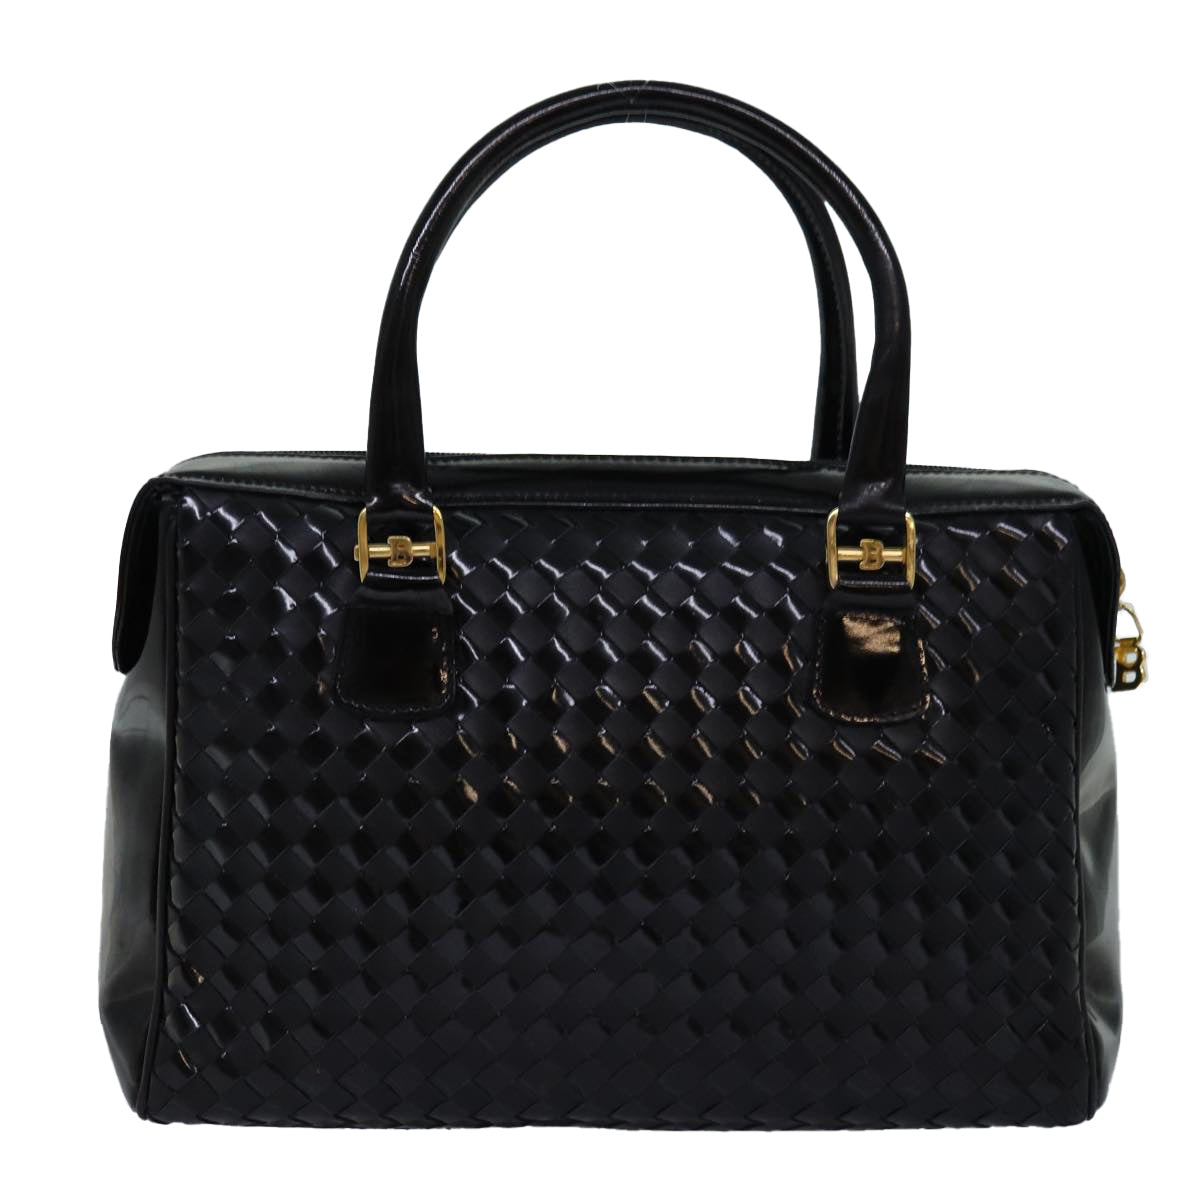 BALLY Hand Bag Patent leather Black Auth bs14103 - 0